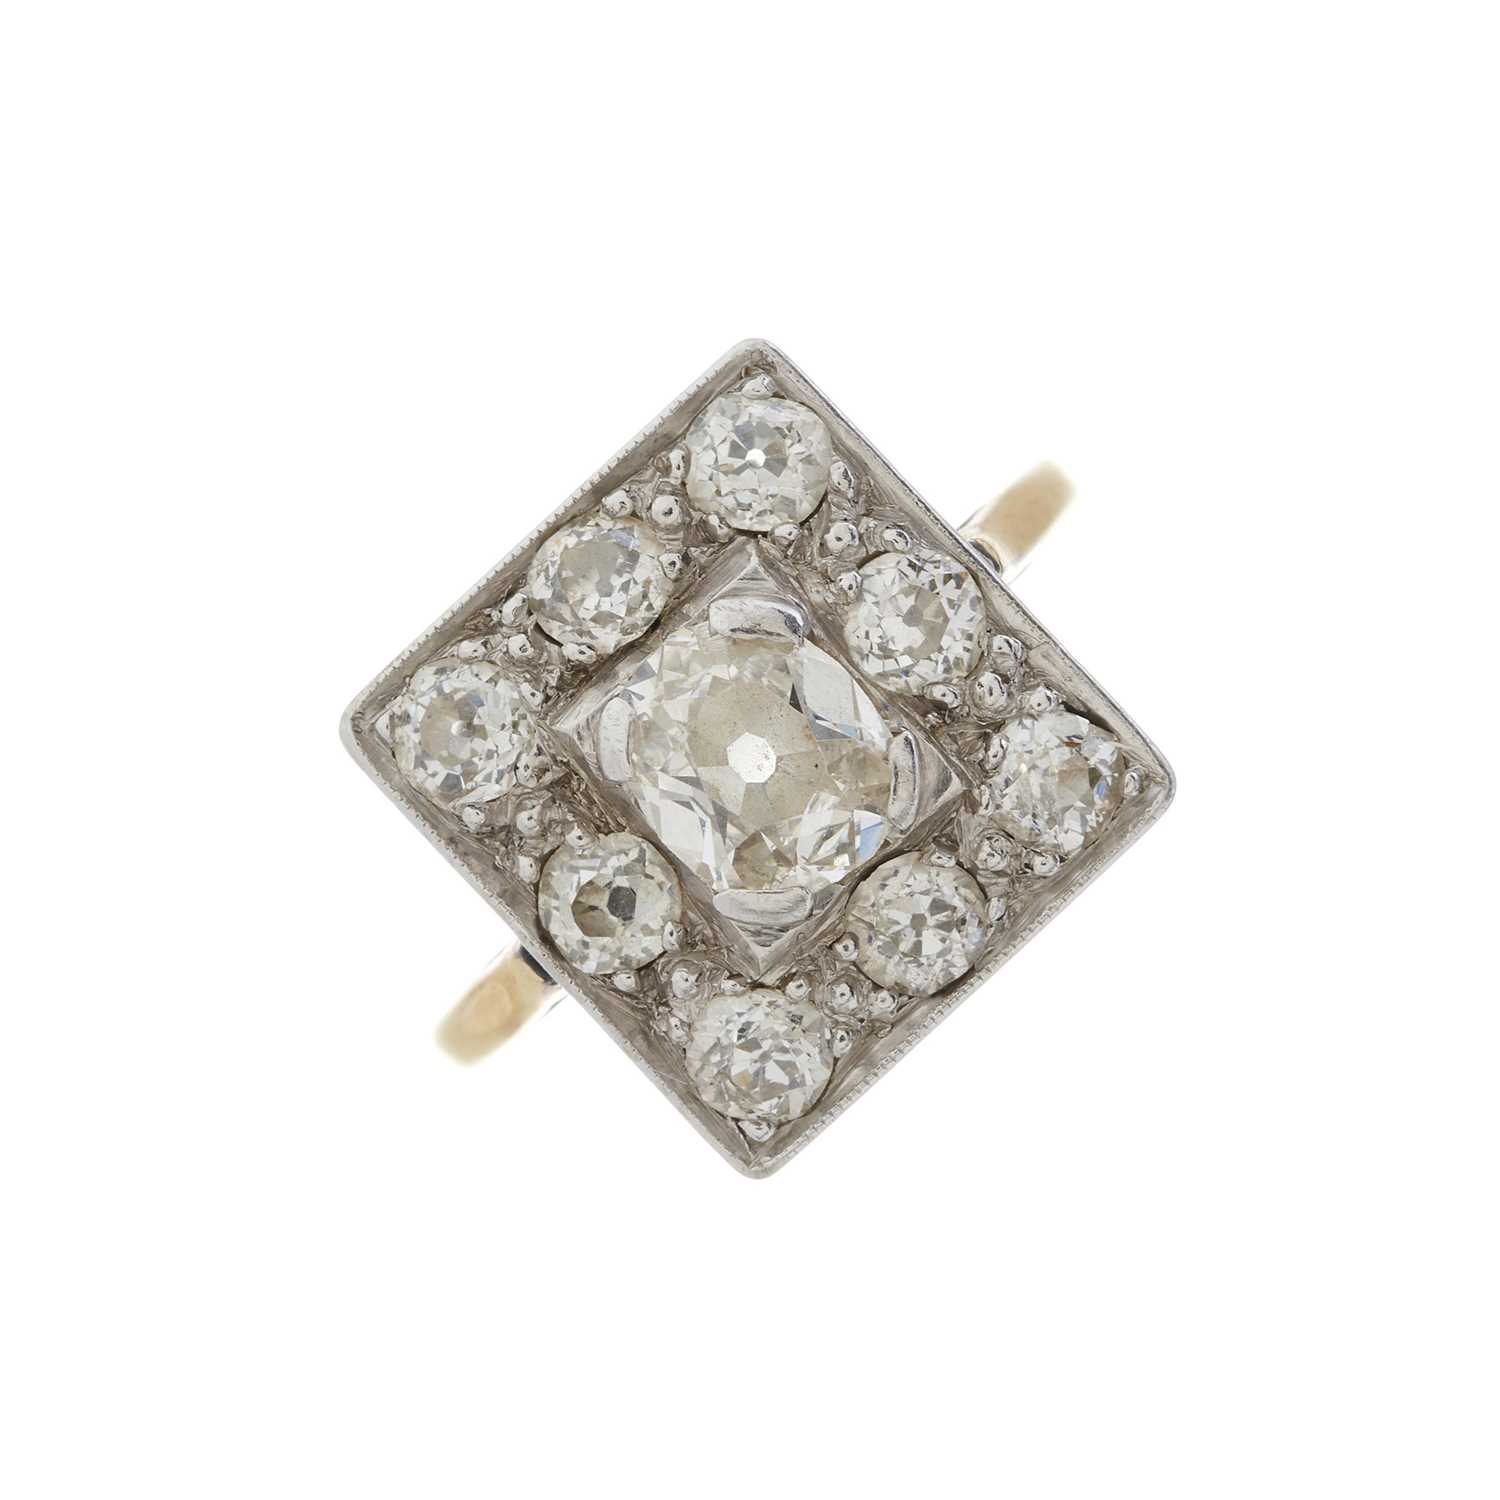 An early 20th century diamond cluster ring